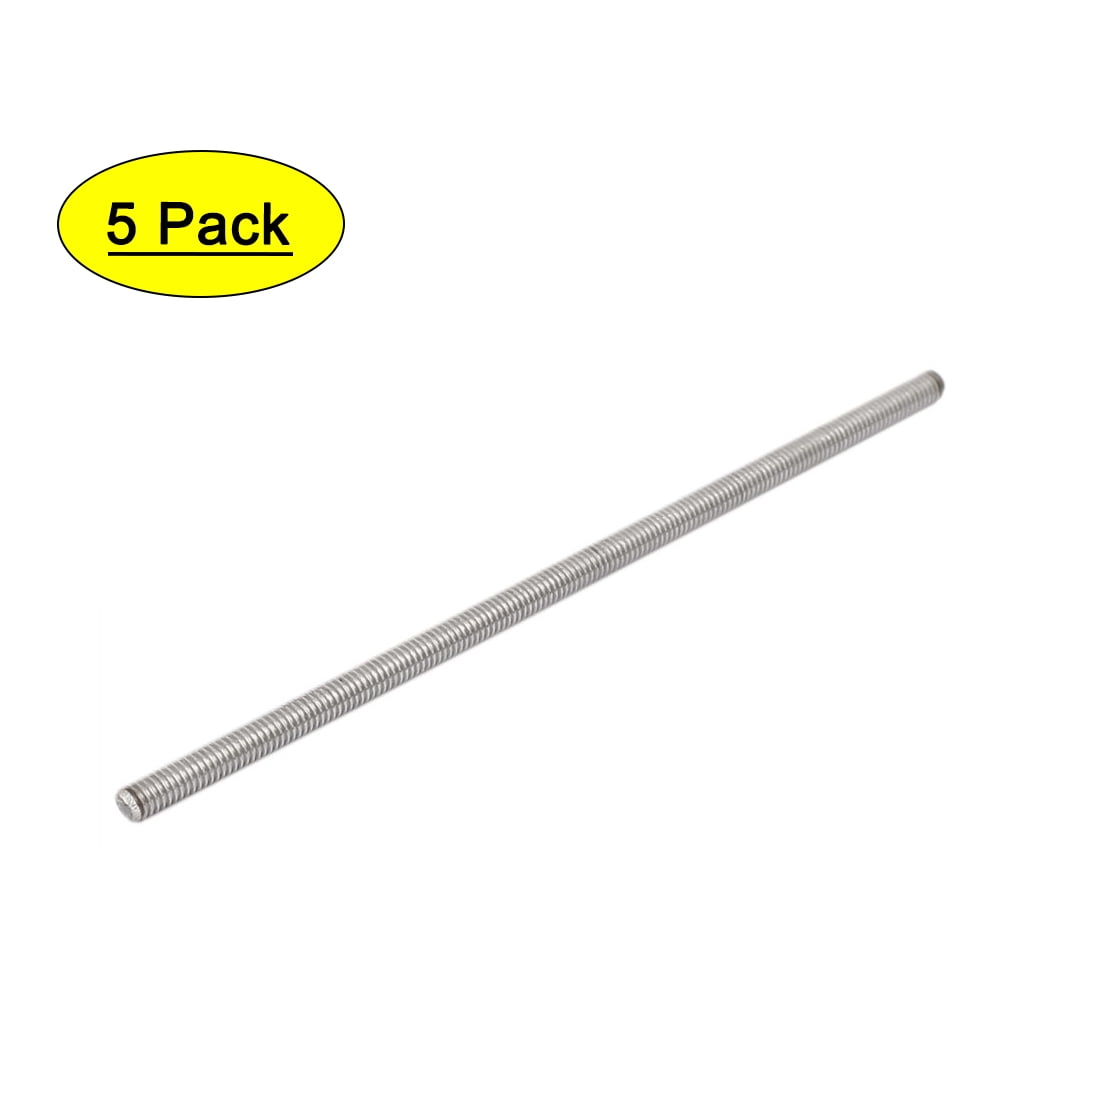 Beduan Stainless Steel Long Threaded Screw M4-0.7 Thread Pitch 250 mm Length Fully Threaded Rod 